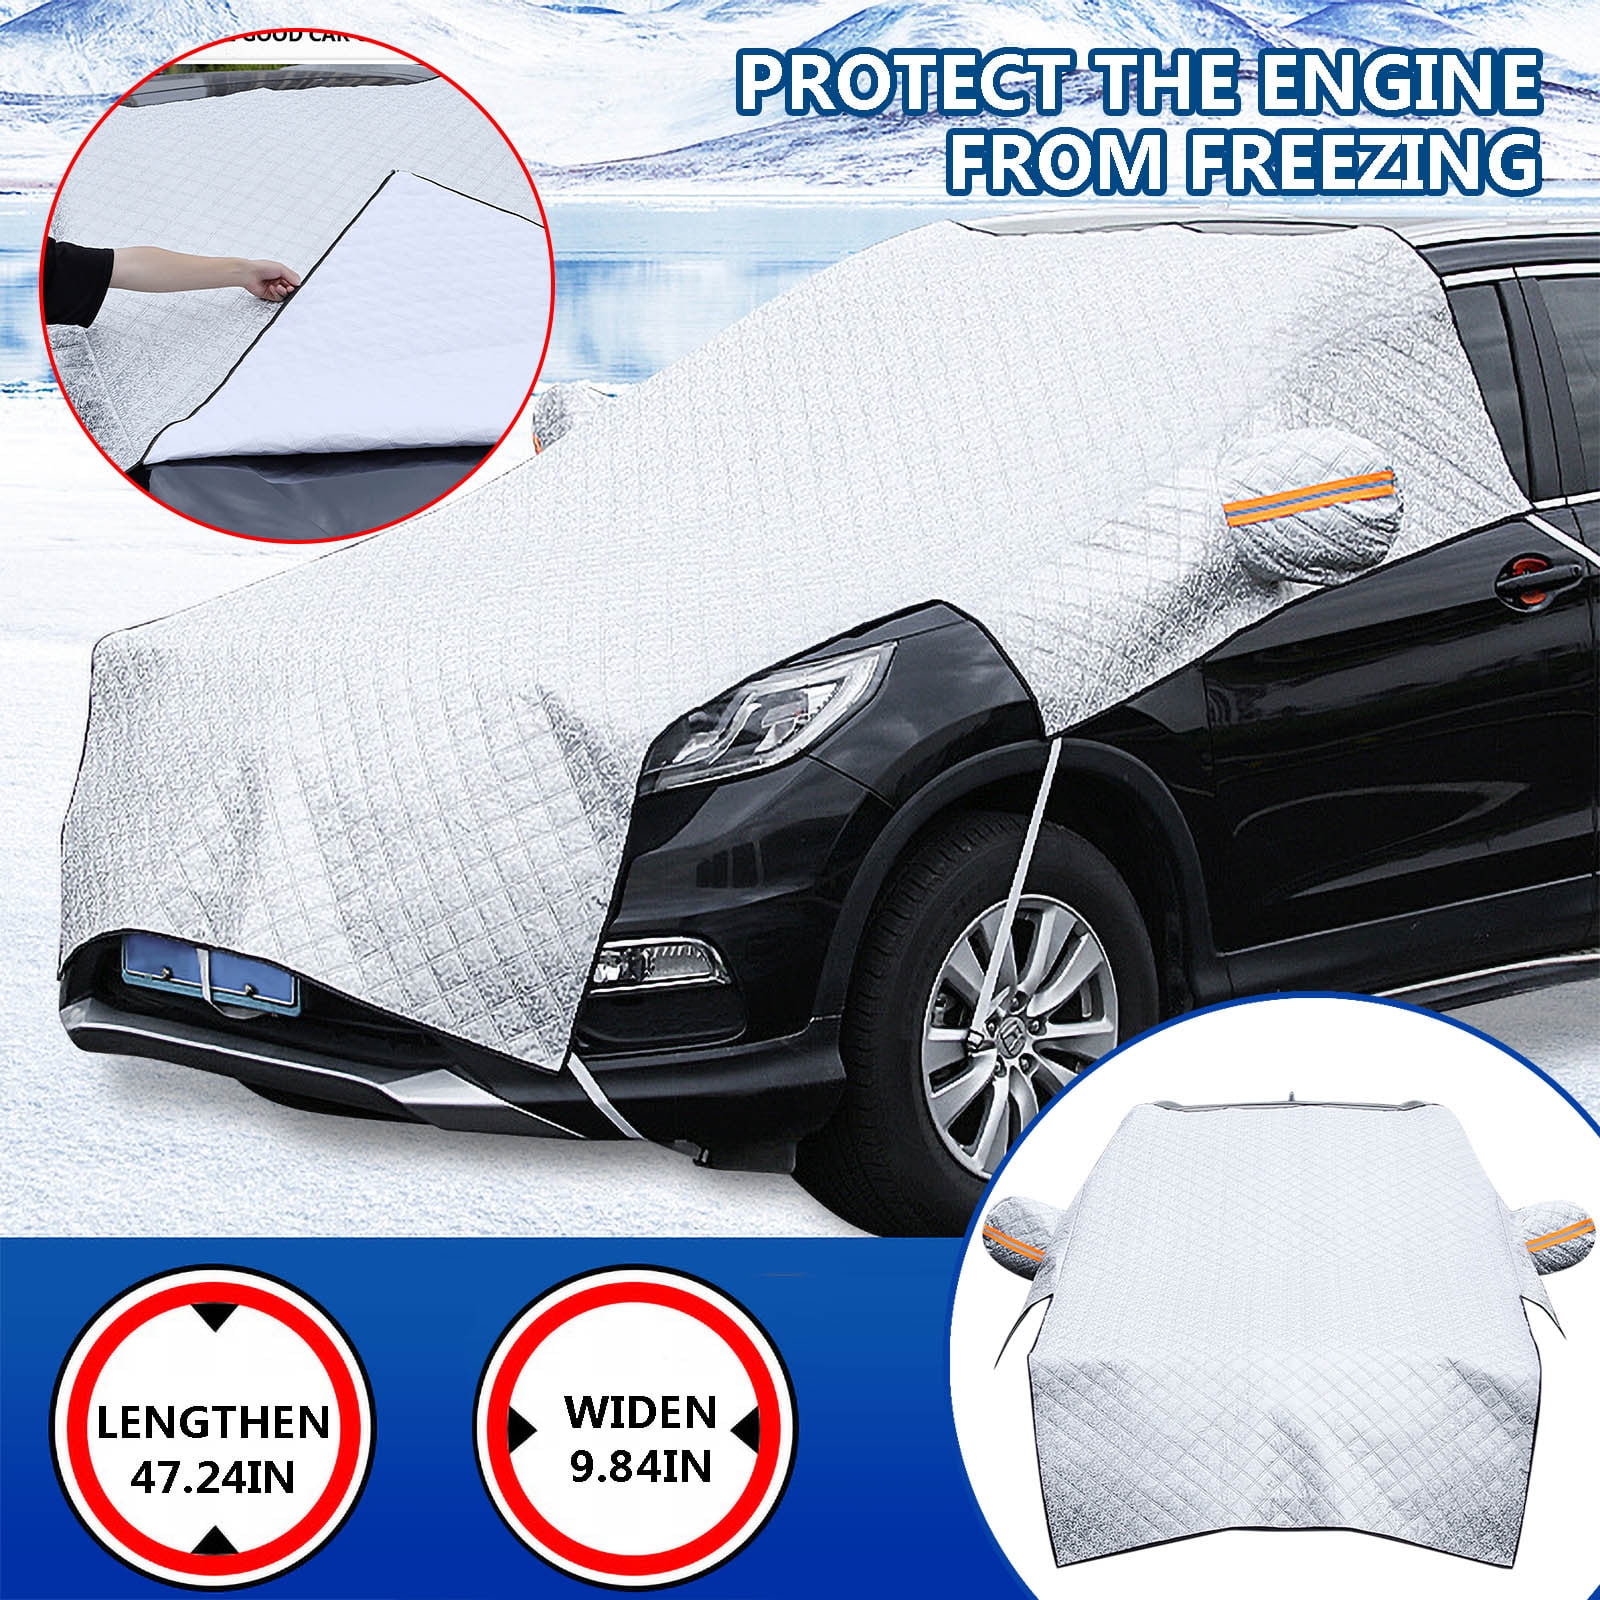 Waterproof Car Snow Cover Windshield for Snow GES Car Windshield Snow Cover SUV Van Frost Cover Fit Most Car UV Protection Truck Windshield Frost Cover with 4 Layers Protector 